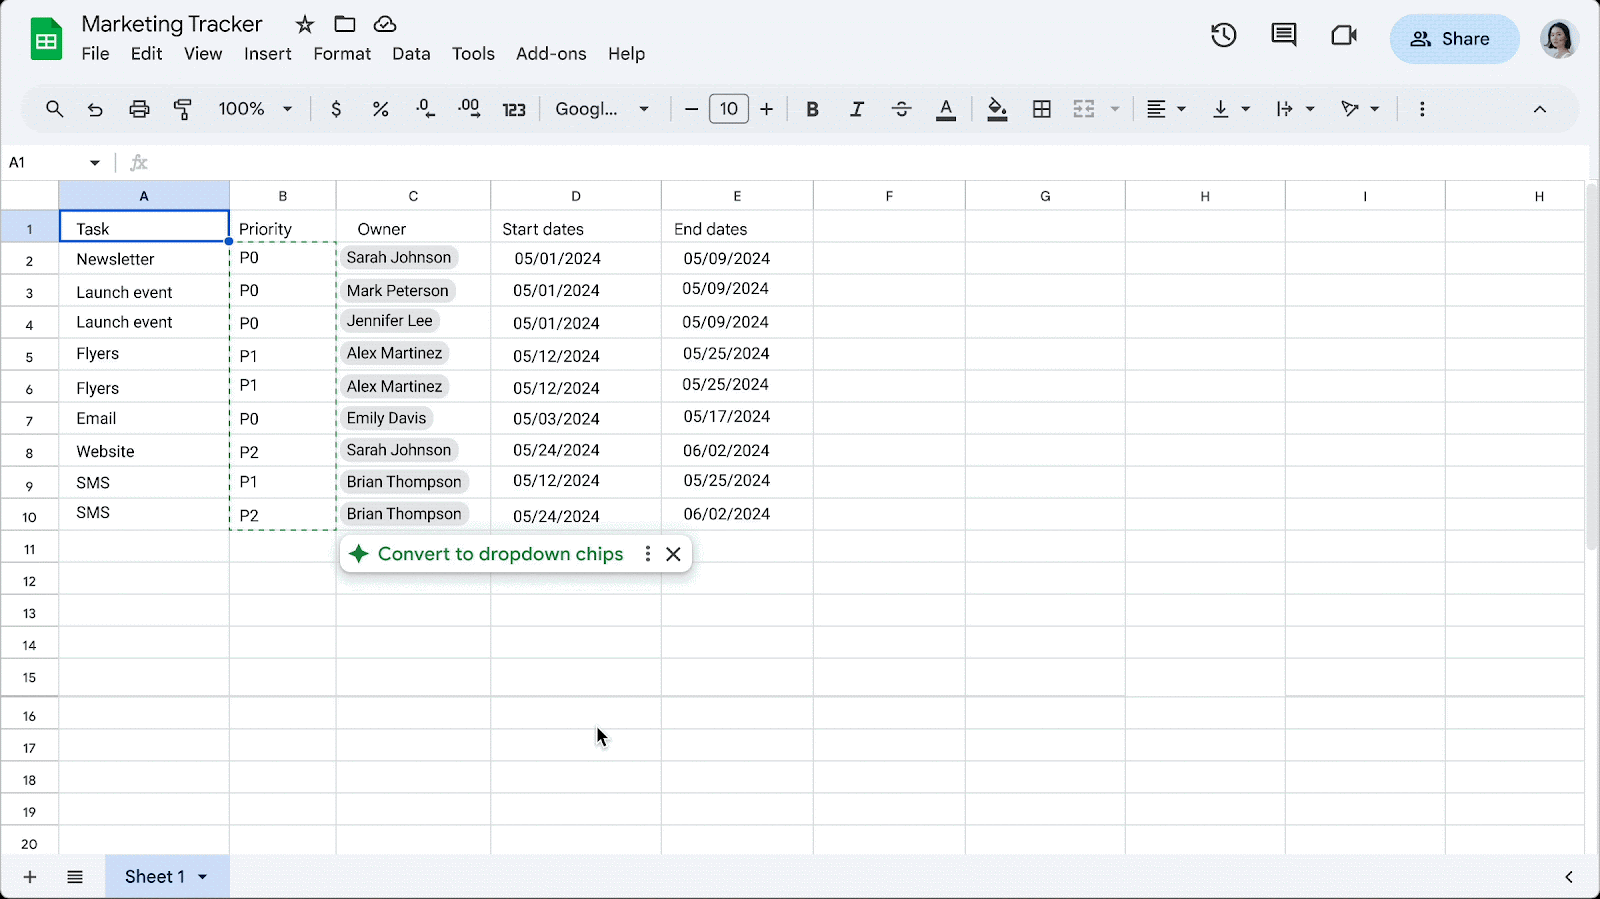 Easily convert data to dropdown chips in Google Sheets